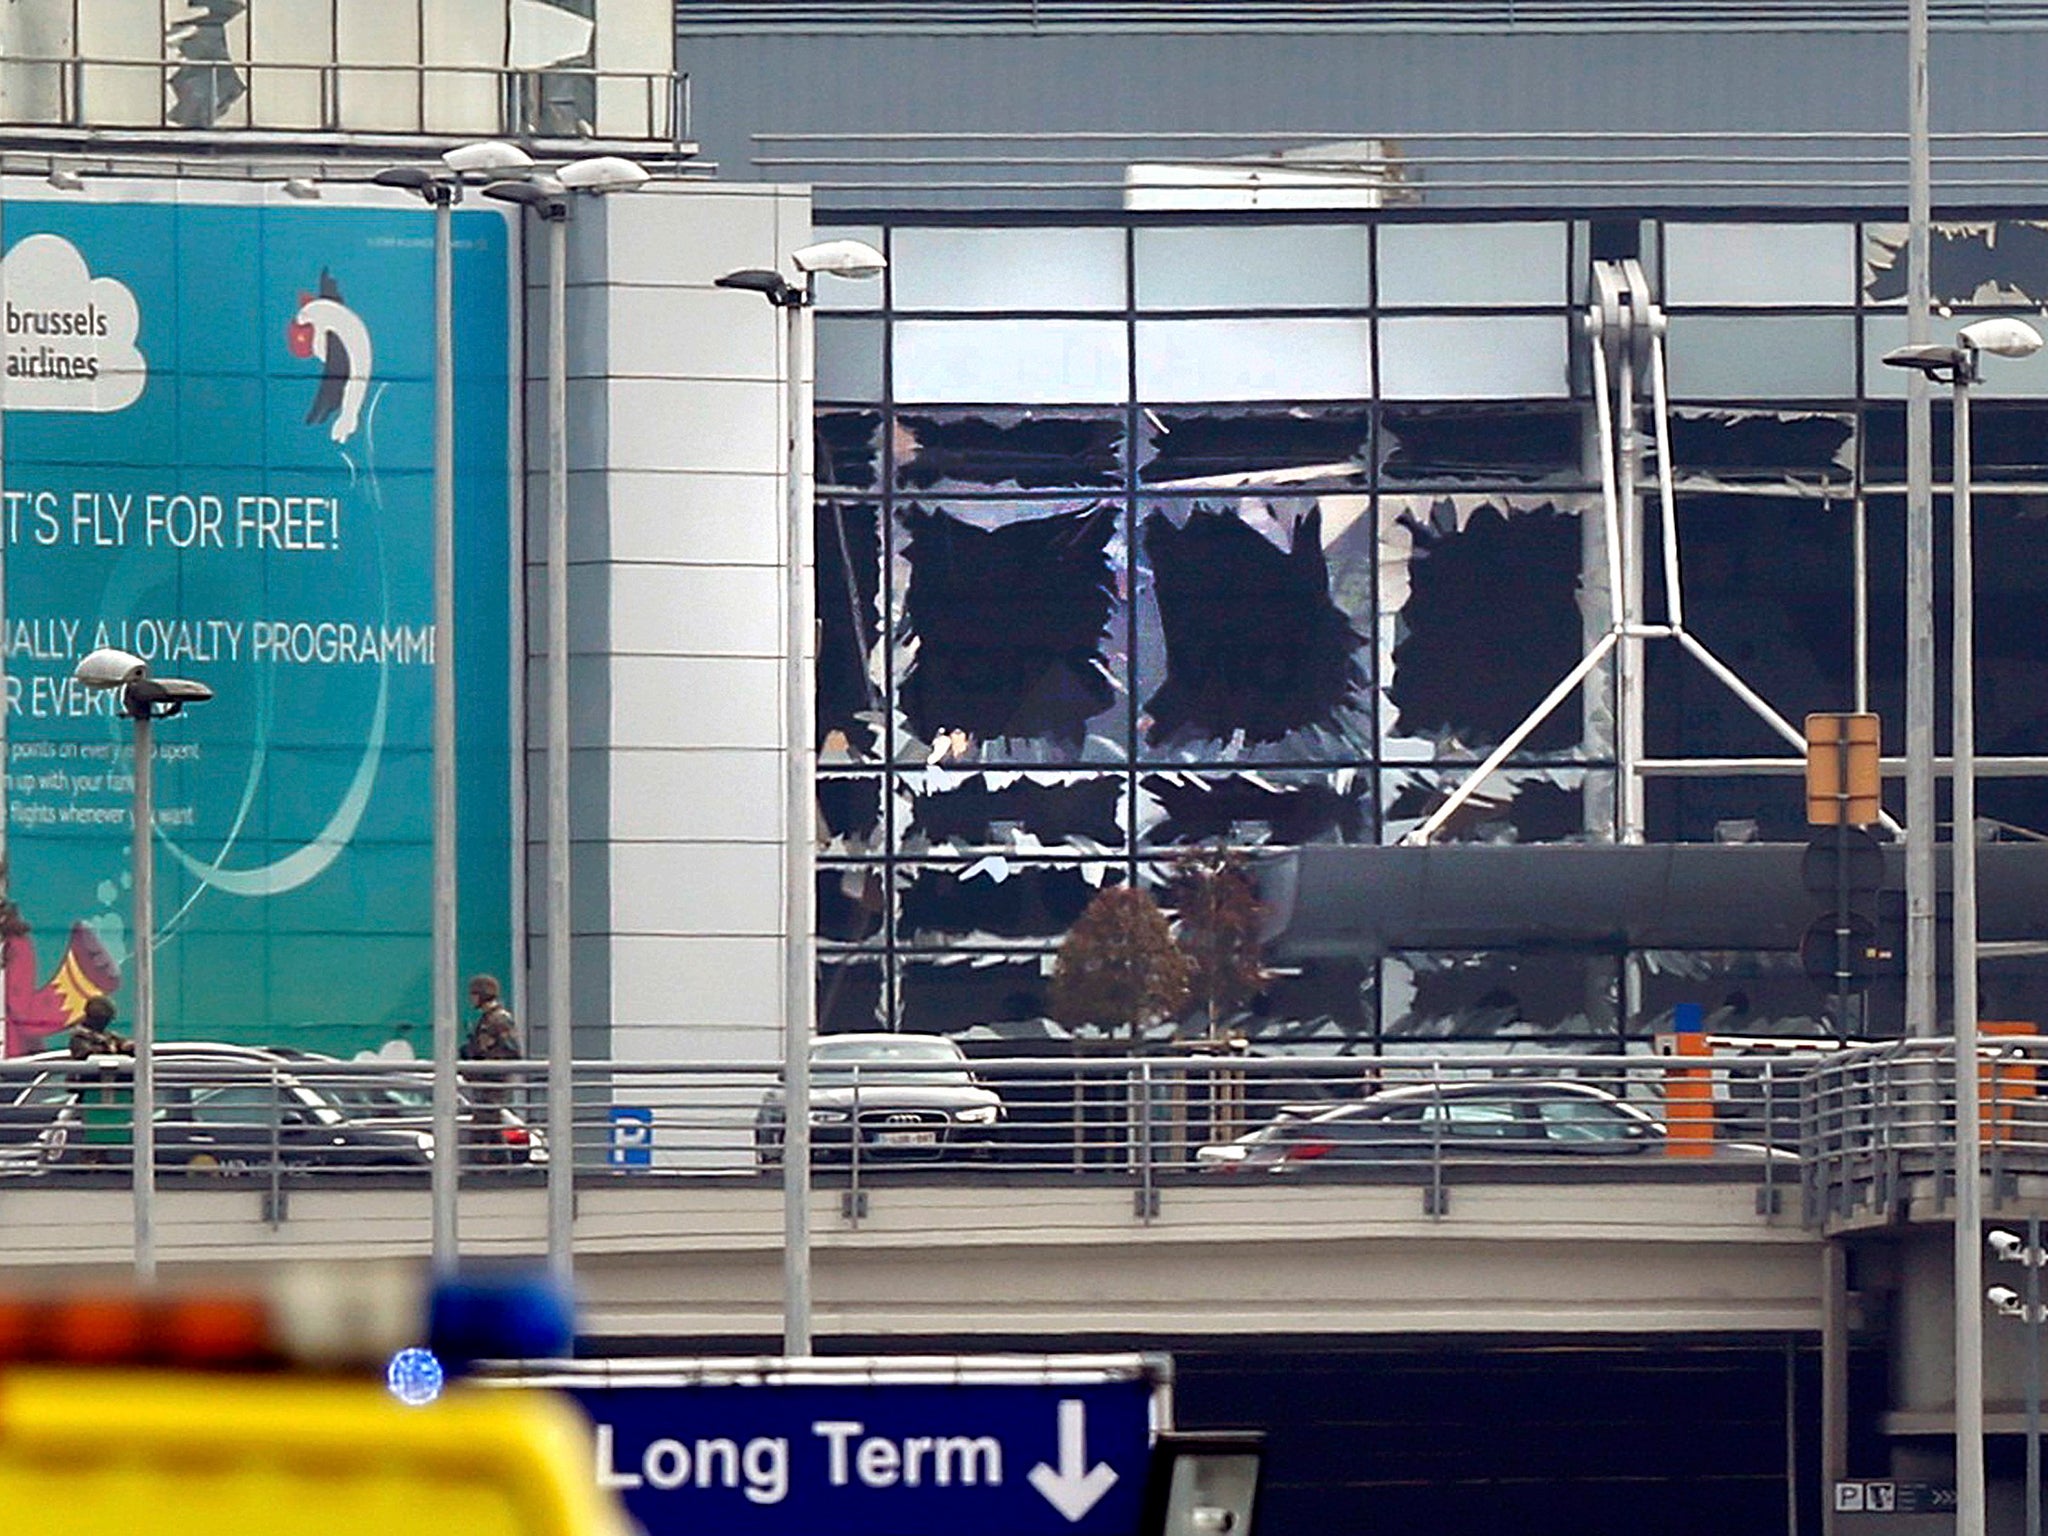 Broken windows seen at the scene of explosions at Zaventem airport near Brussels